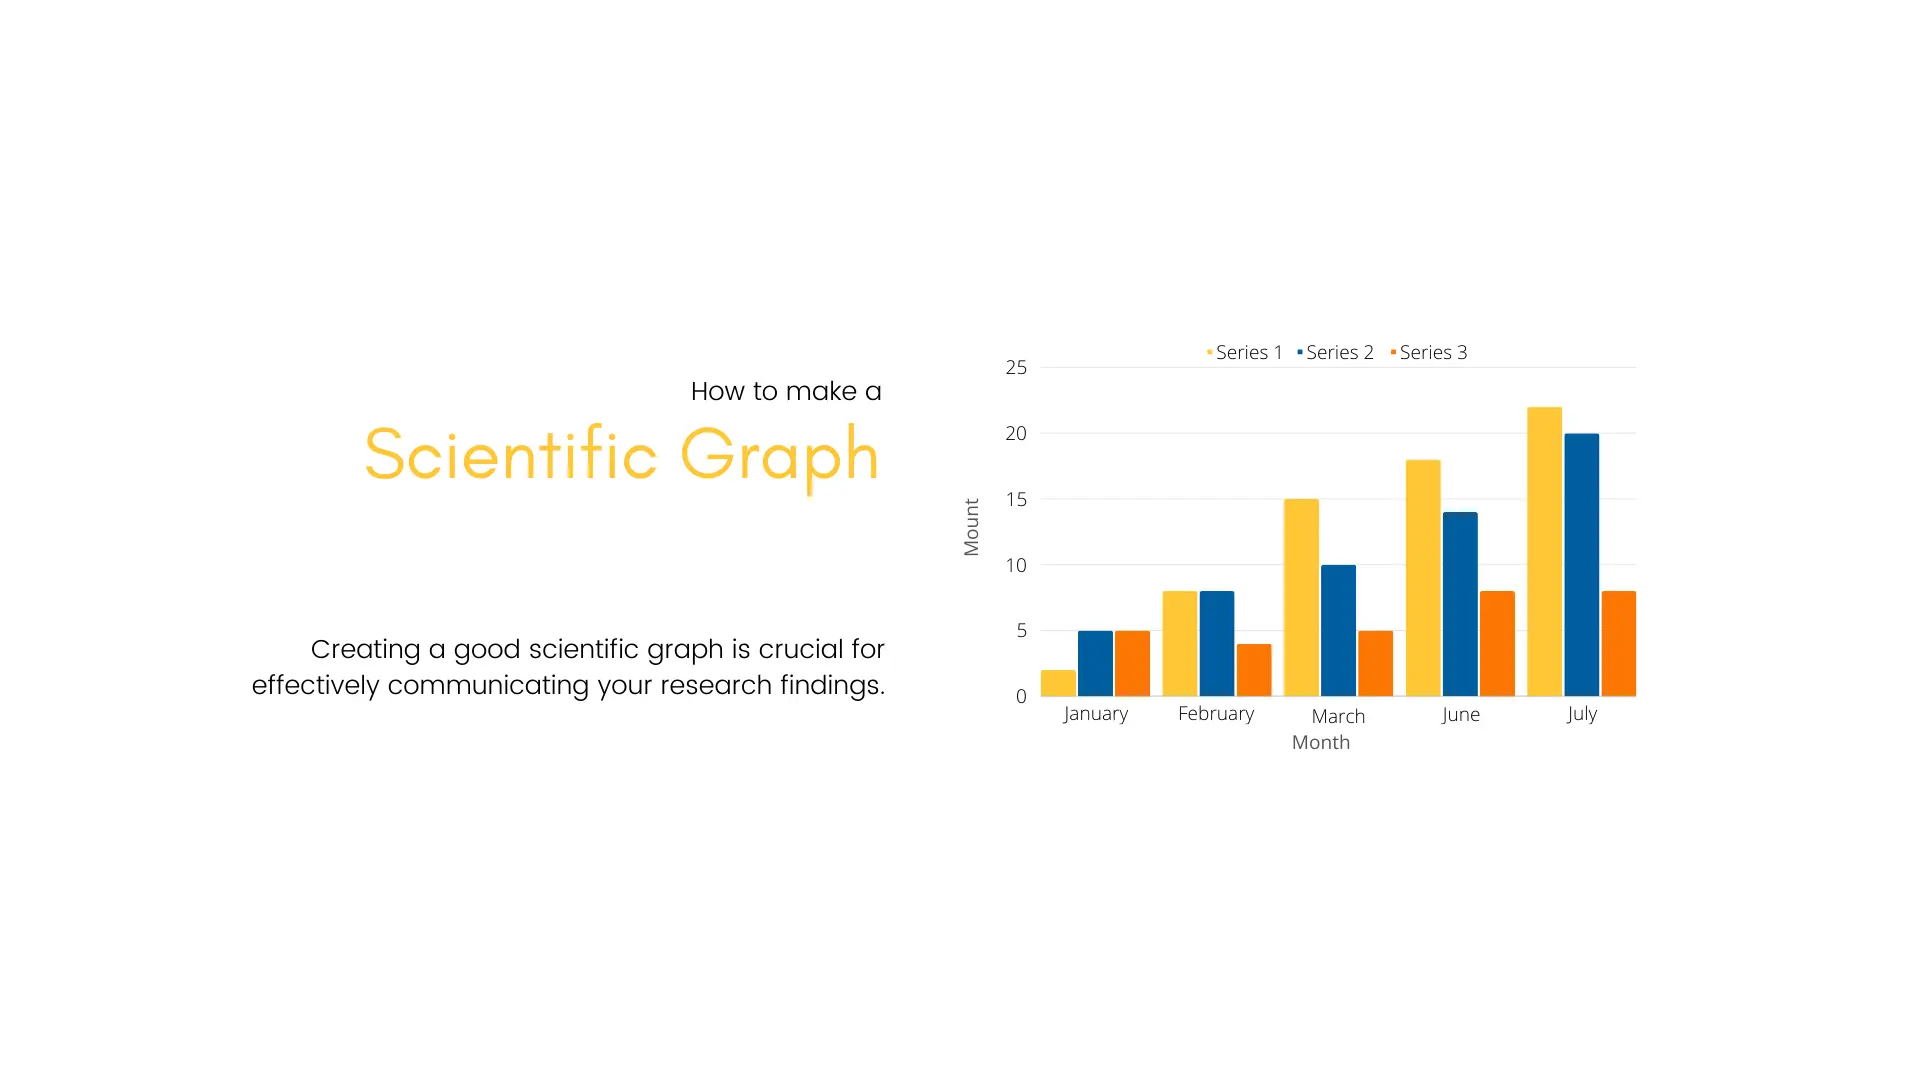 How to make a scientific graph?